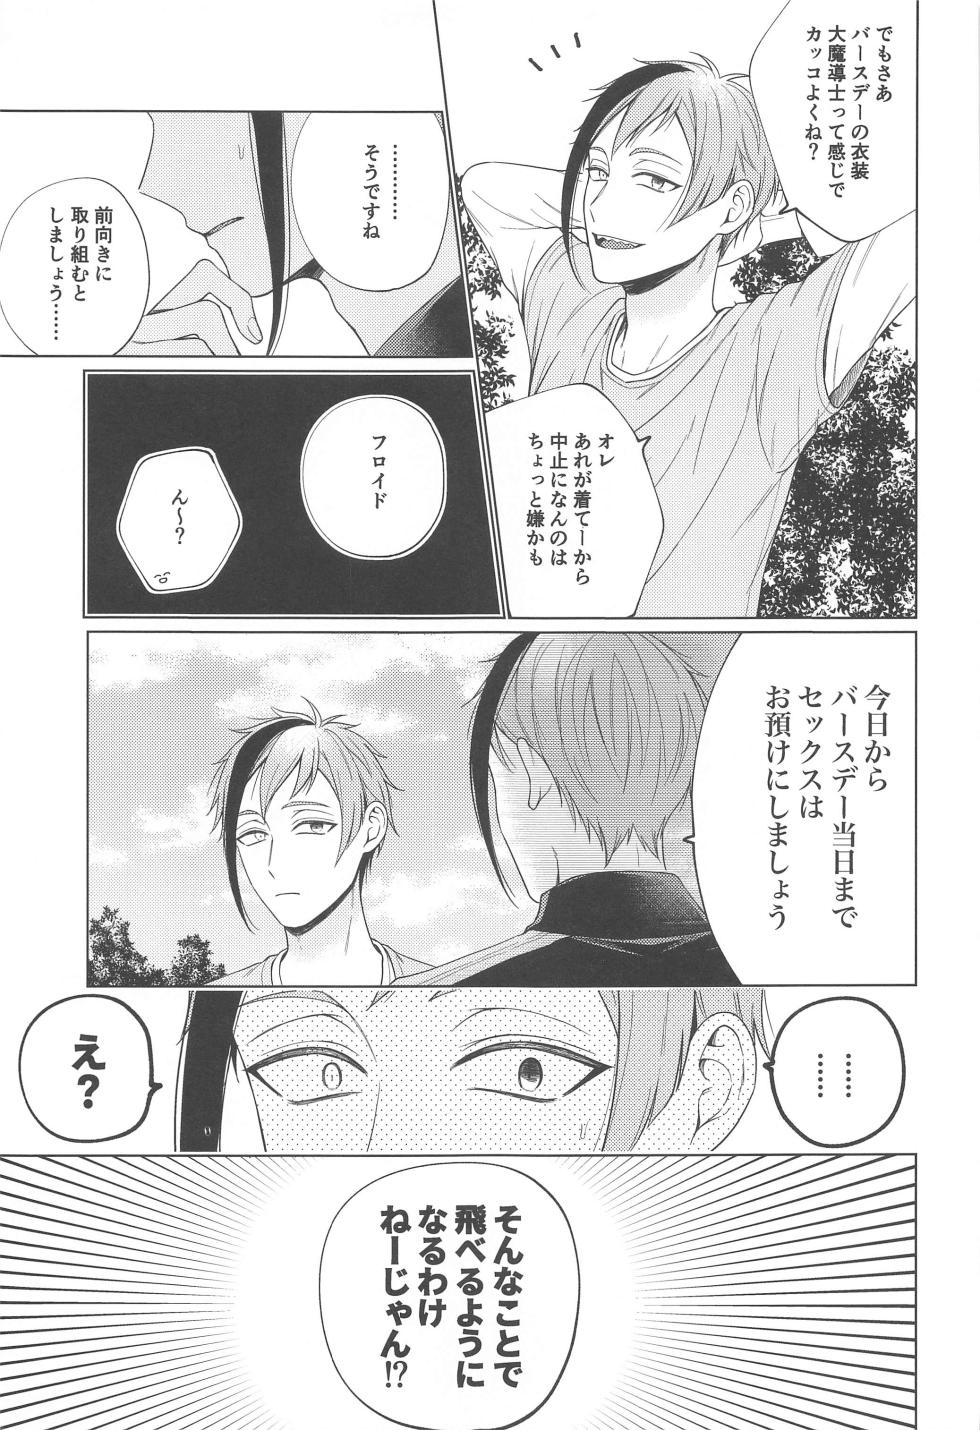 (Beckon of the Mirror 19) [Re:z (Rits)] Lovesick five days. (Disney: Twisted-Wonderland) - Page 4